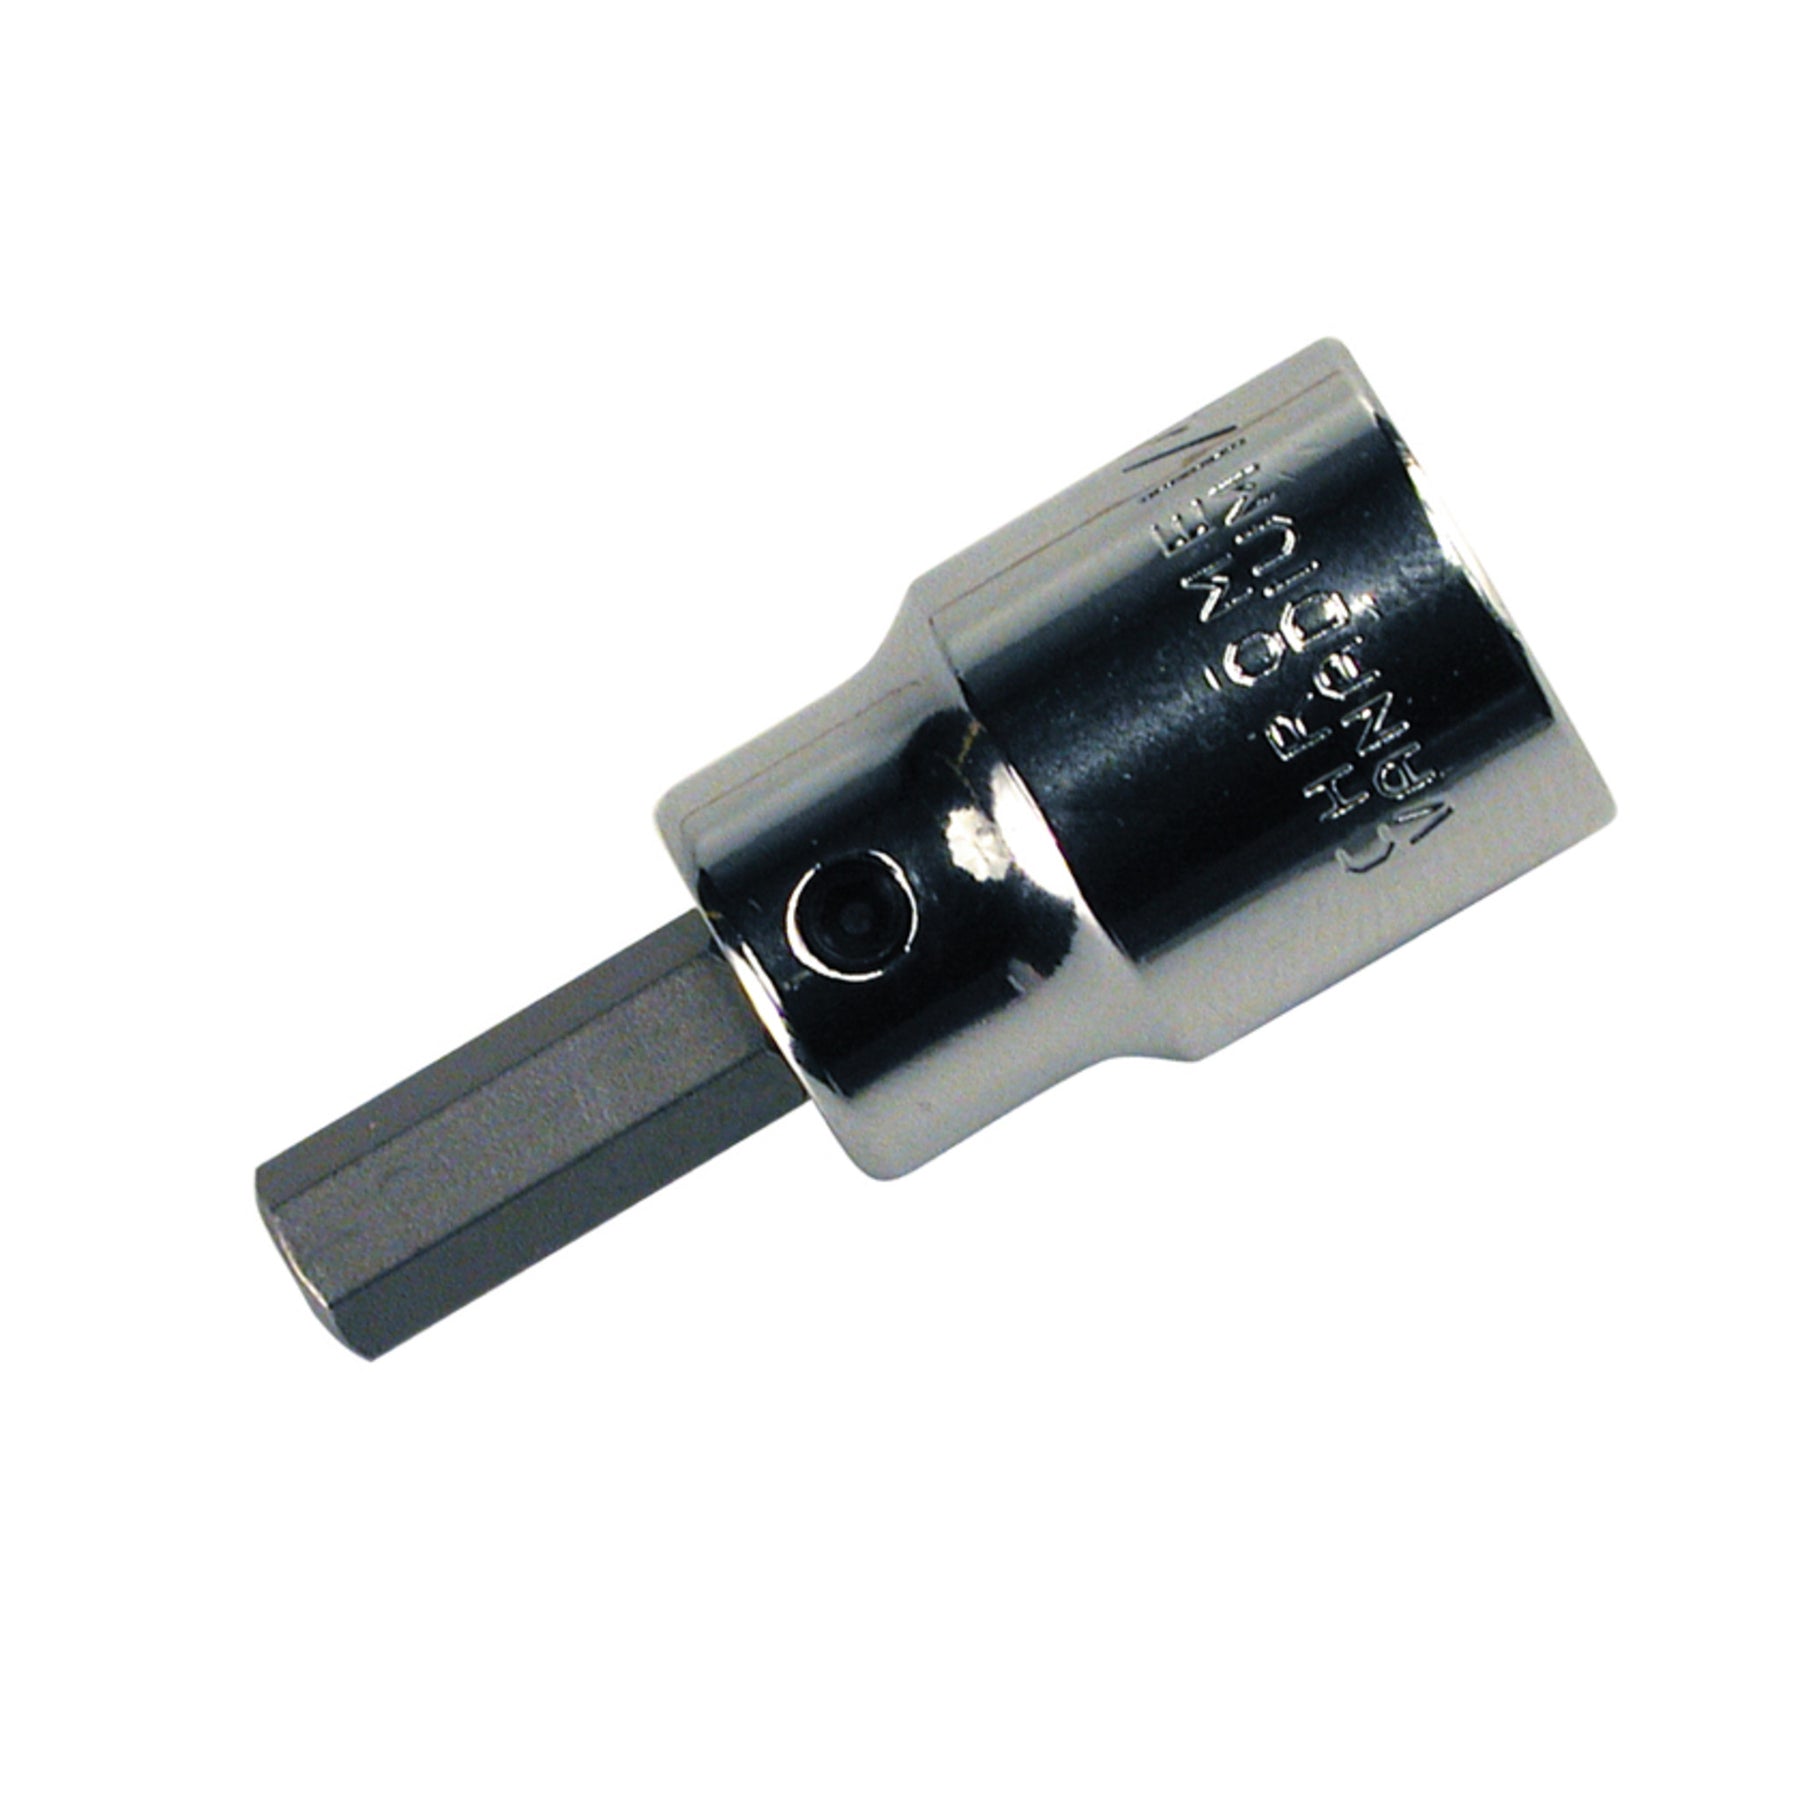 Security Hex BitSocket 3/8" Drive 3/32"